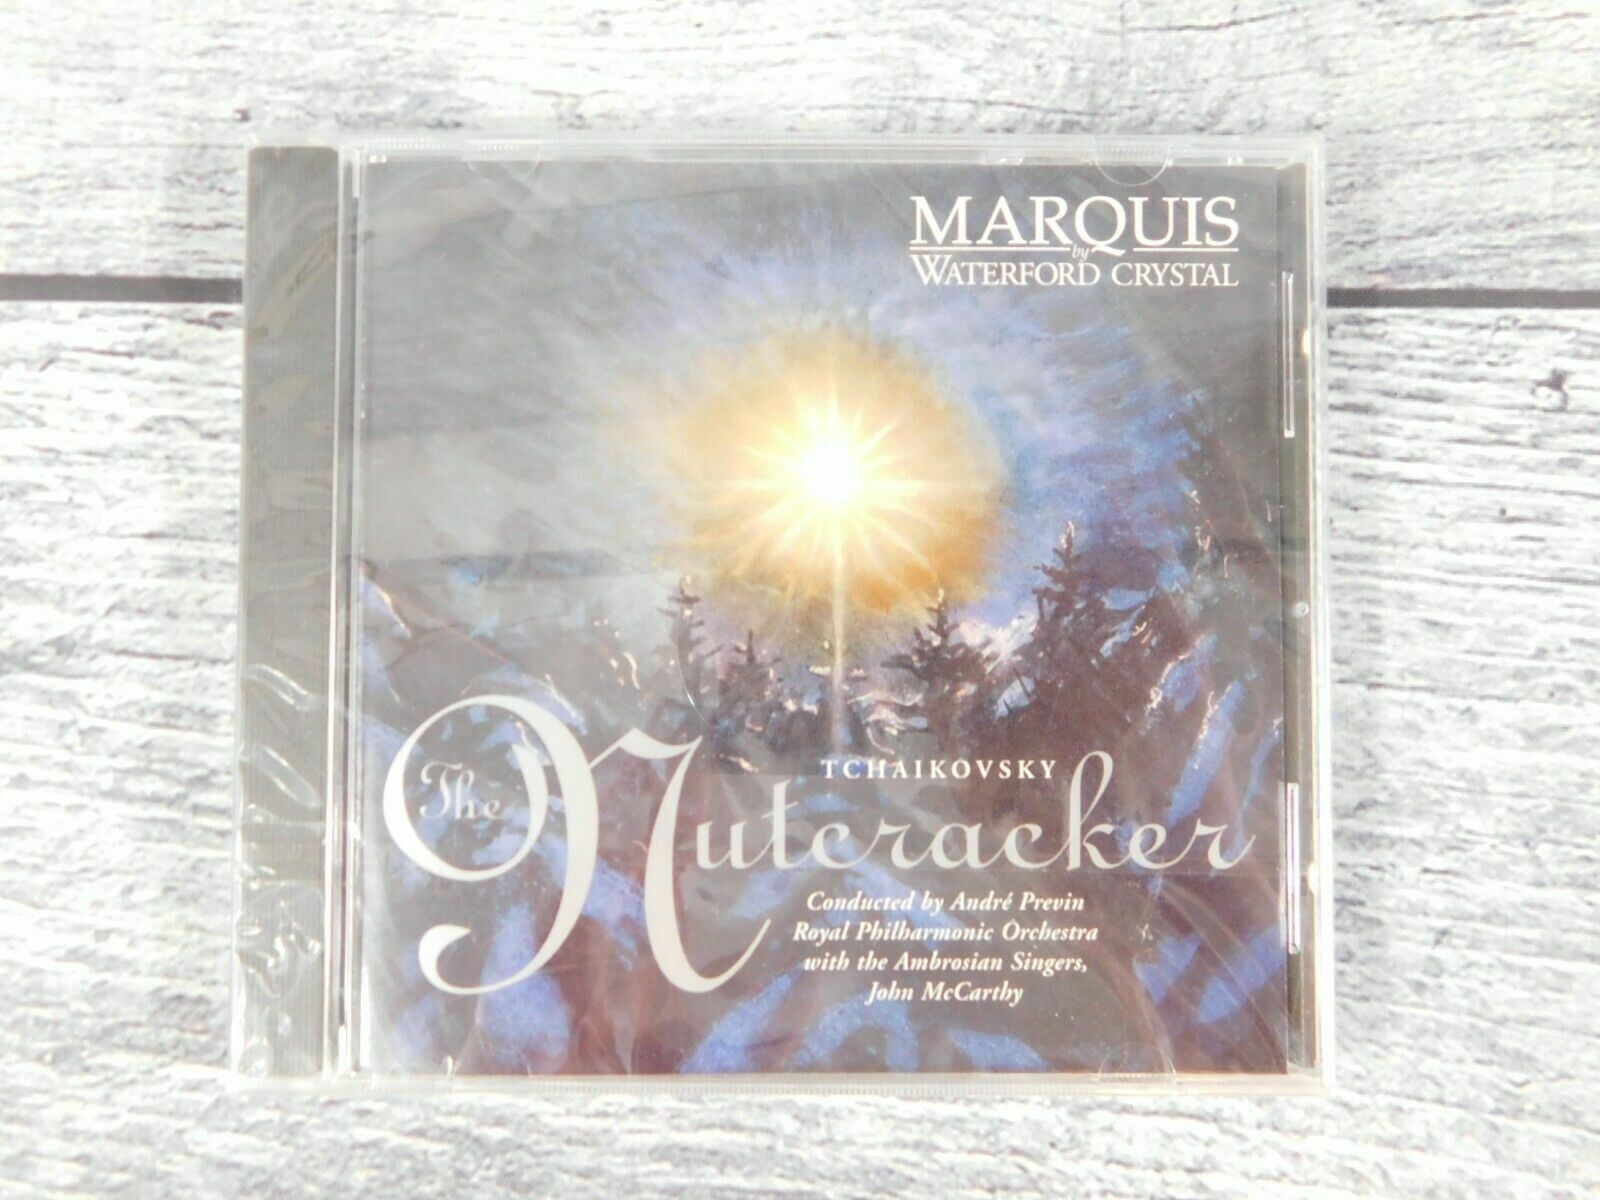 Marquis by Waterford Crystal - Tchaikovsky The Nutcracker CD